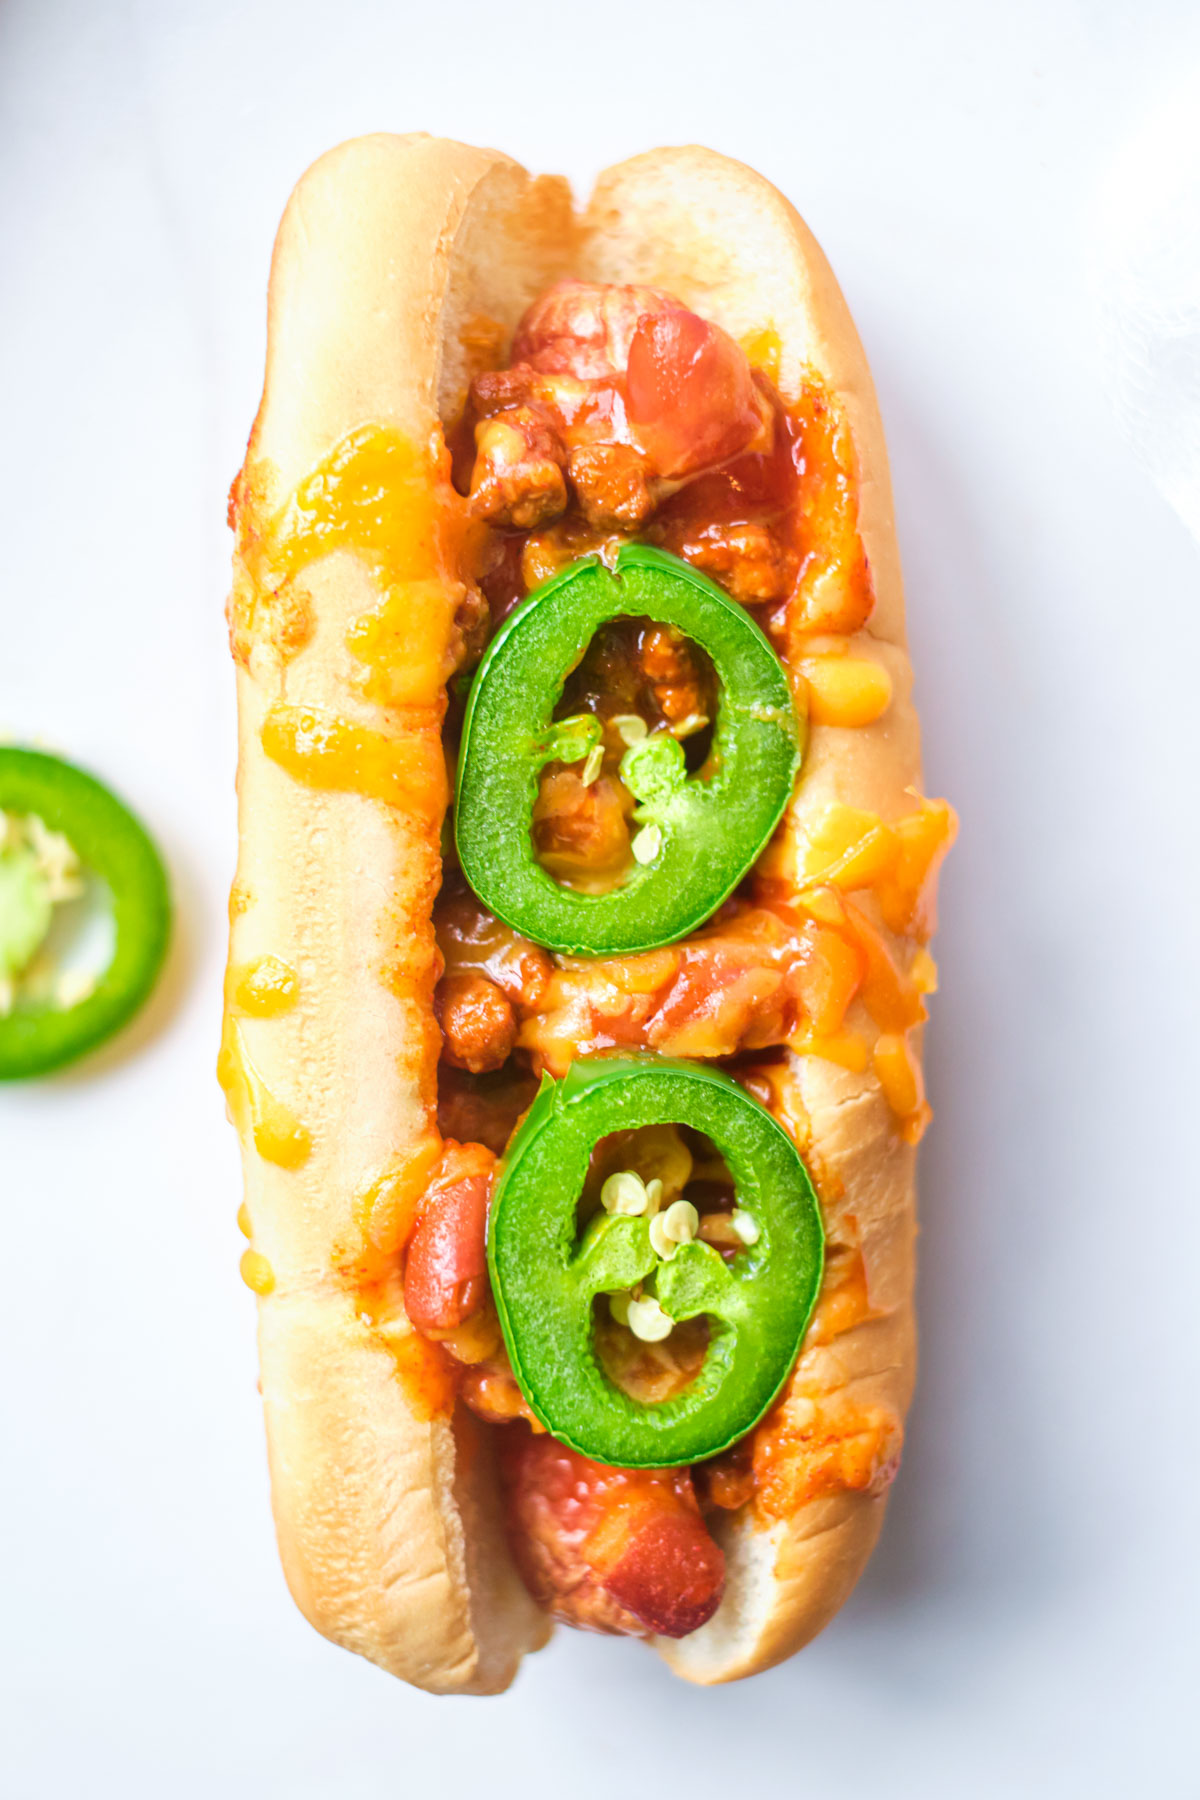 close up of cooked chili cheese dog with melted cheese and jalapeno